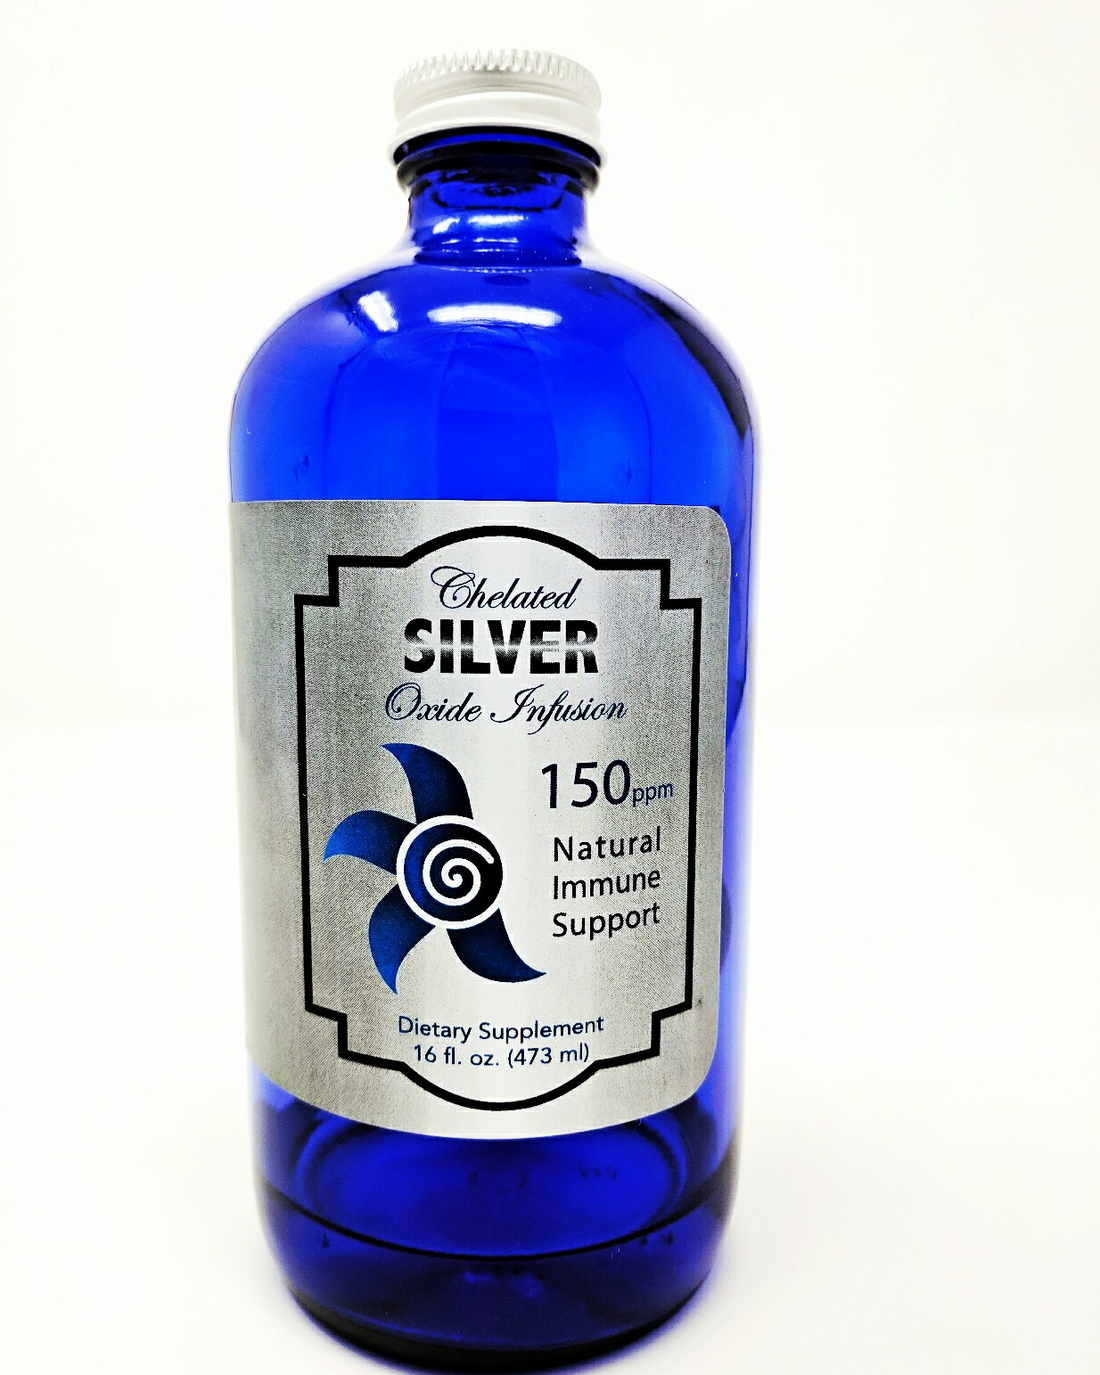 3rd Rock Essentials Silver Water - Silver Oxide Infusion 150